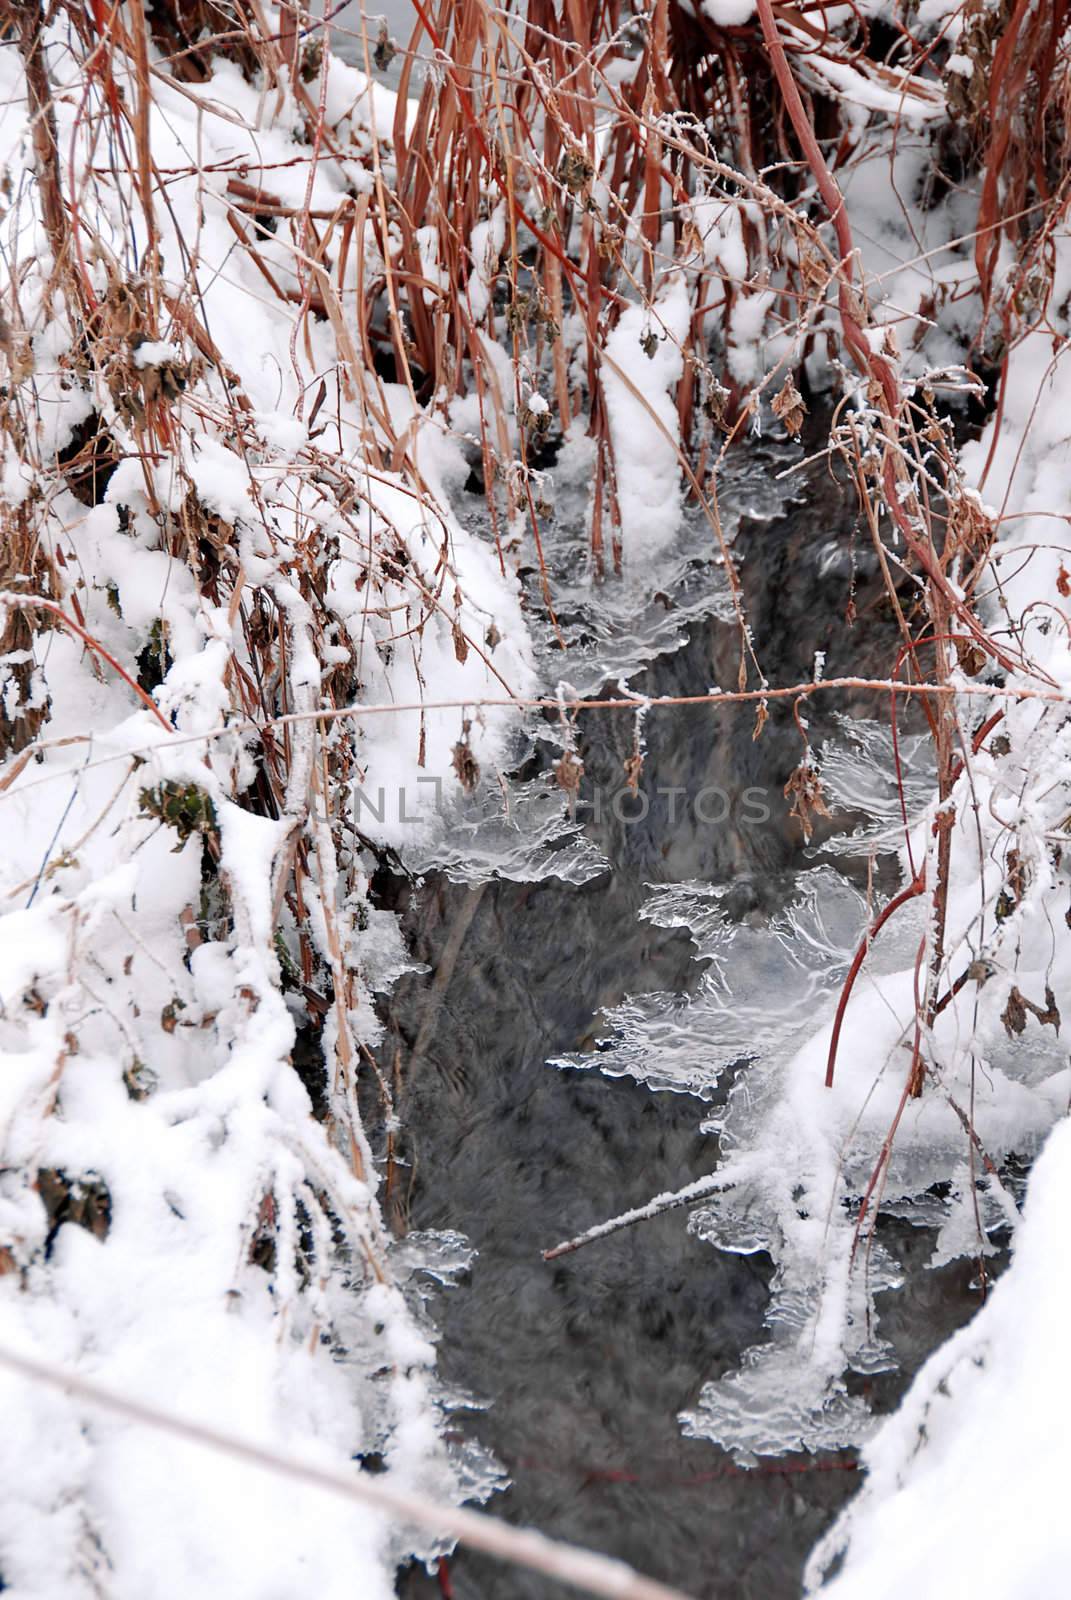 winter stream flowing through snow and ice